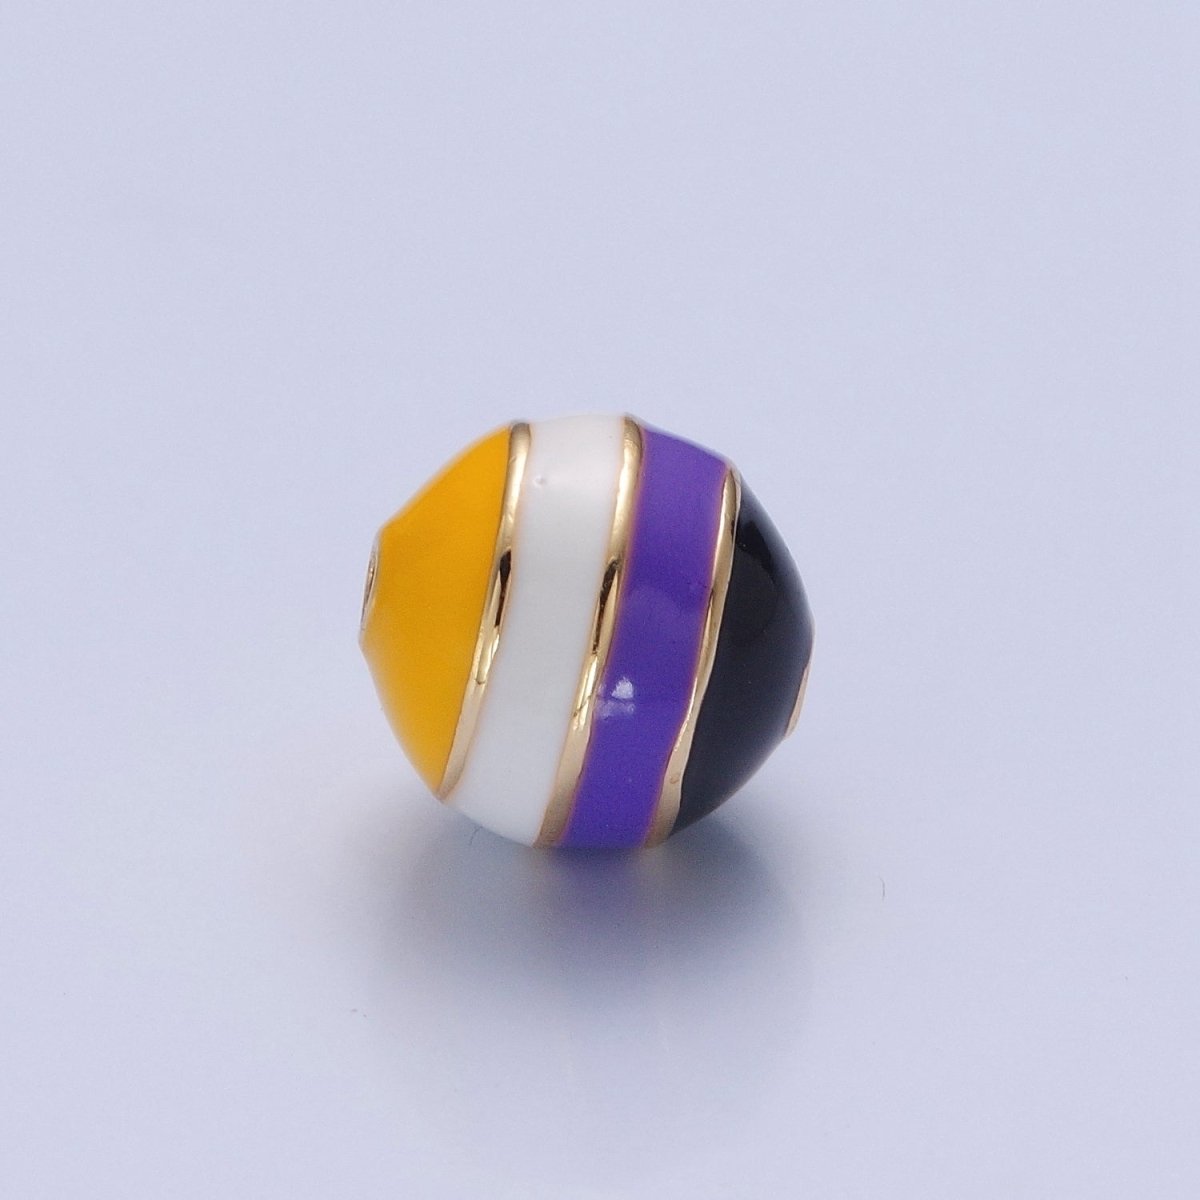 Ball Pride Flag Bead LGBTQ Pendant 14k Gold Filled 10mm Round Bead Trans Gay Pansexual Nonbinary Non Binary Bisexual Asexual B-342 B-428 B-434 B-440 B-441 - DLUXCA